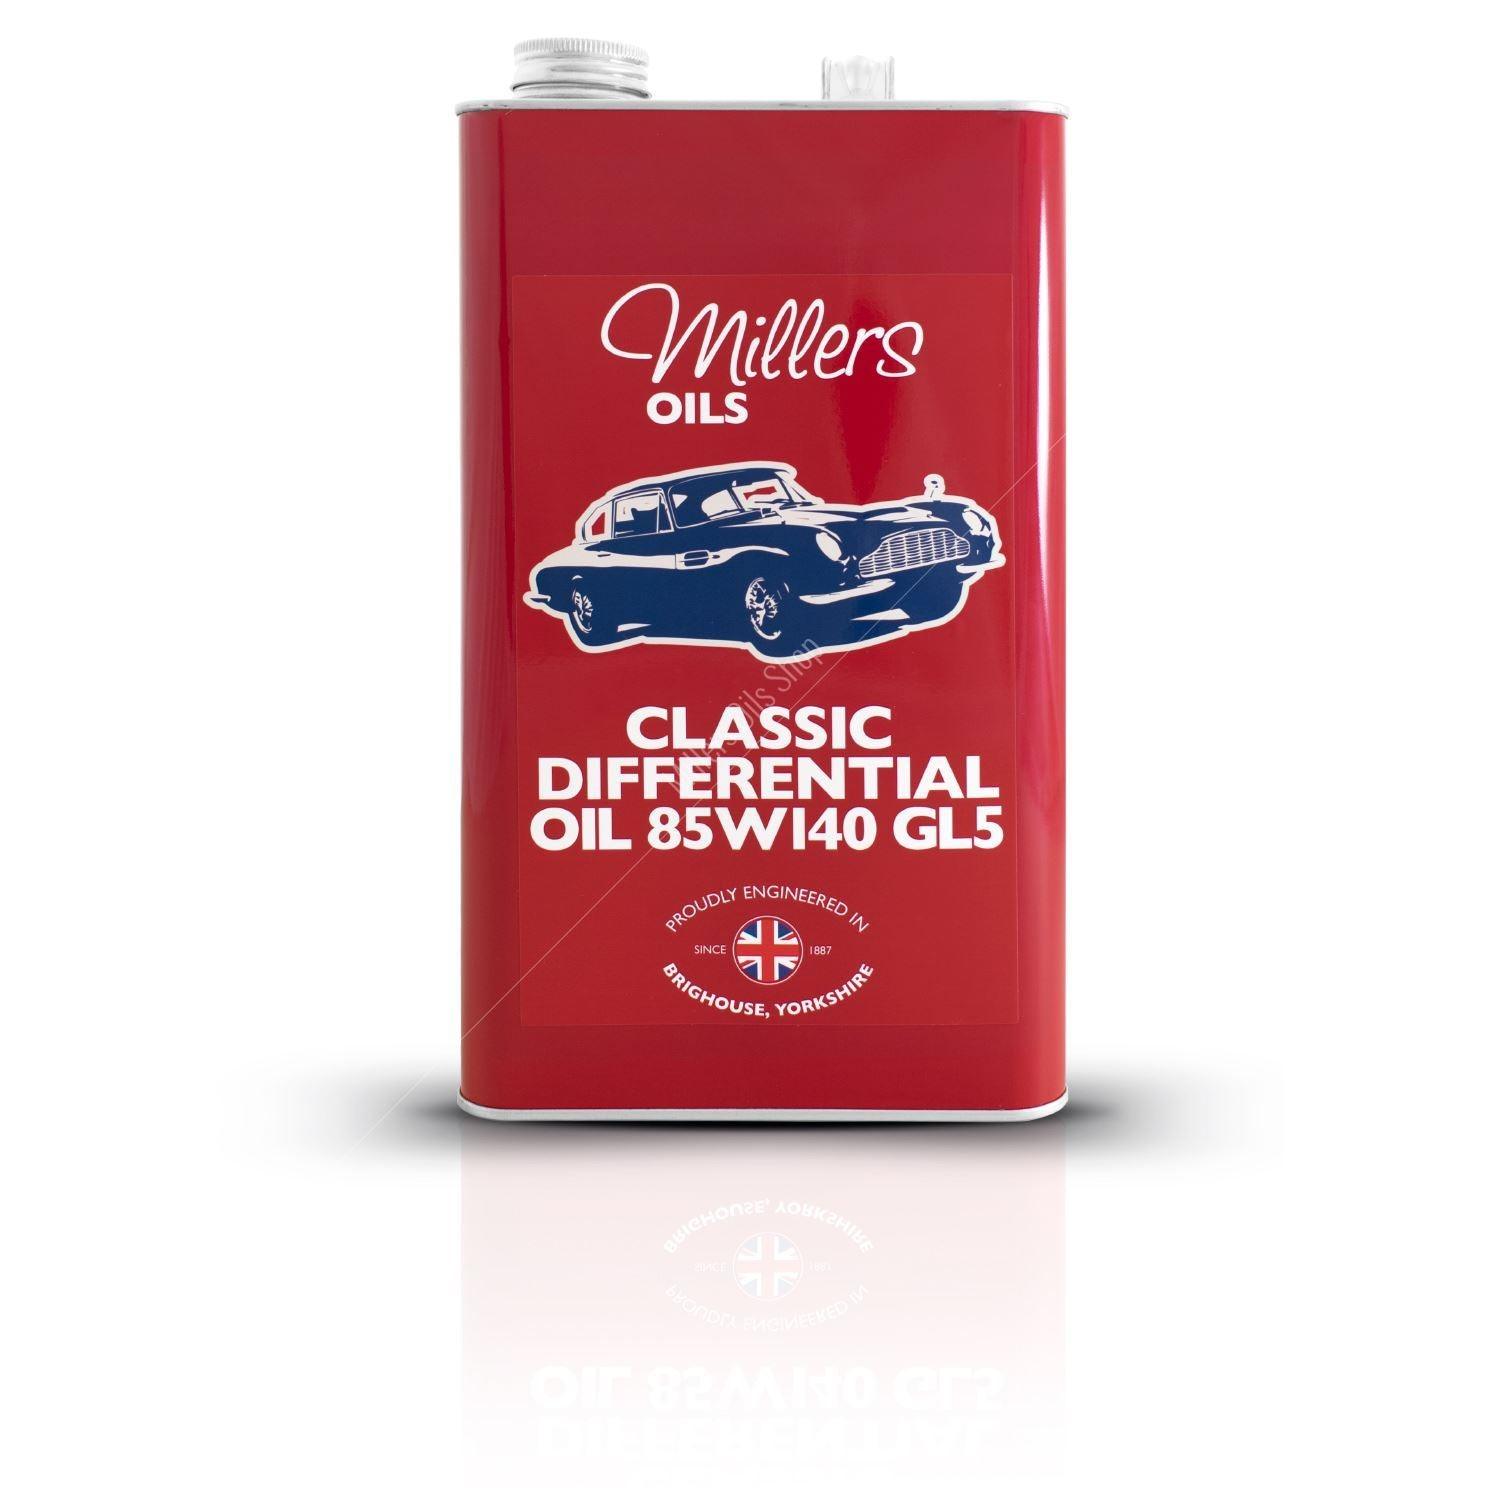 Classic Differential Oil 85w140 GL5 1 liter verpakking - Berry Smink British Car Parts